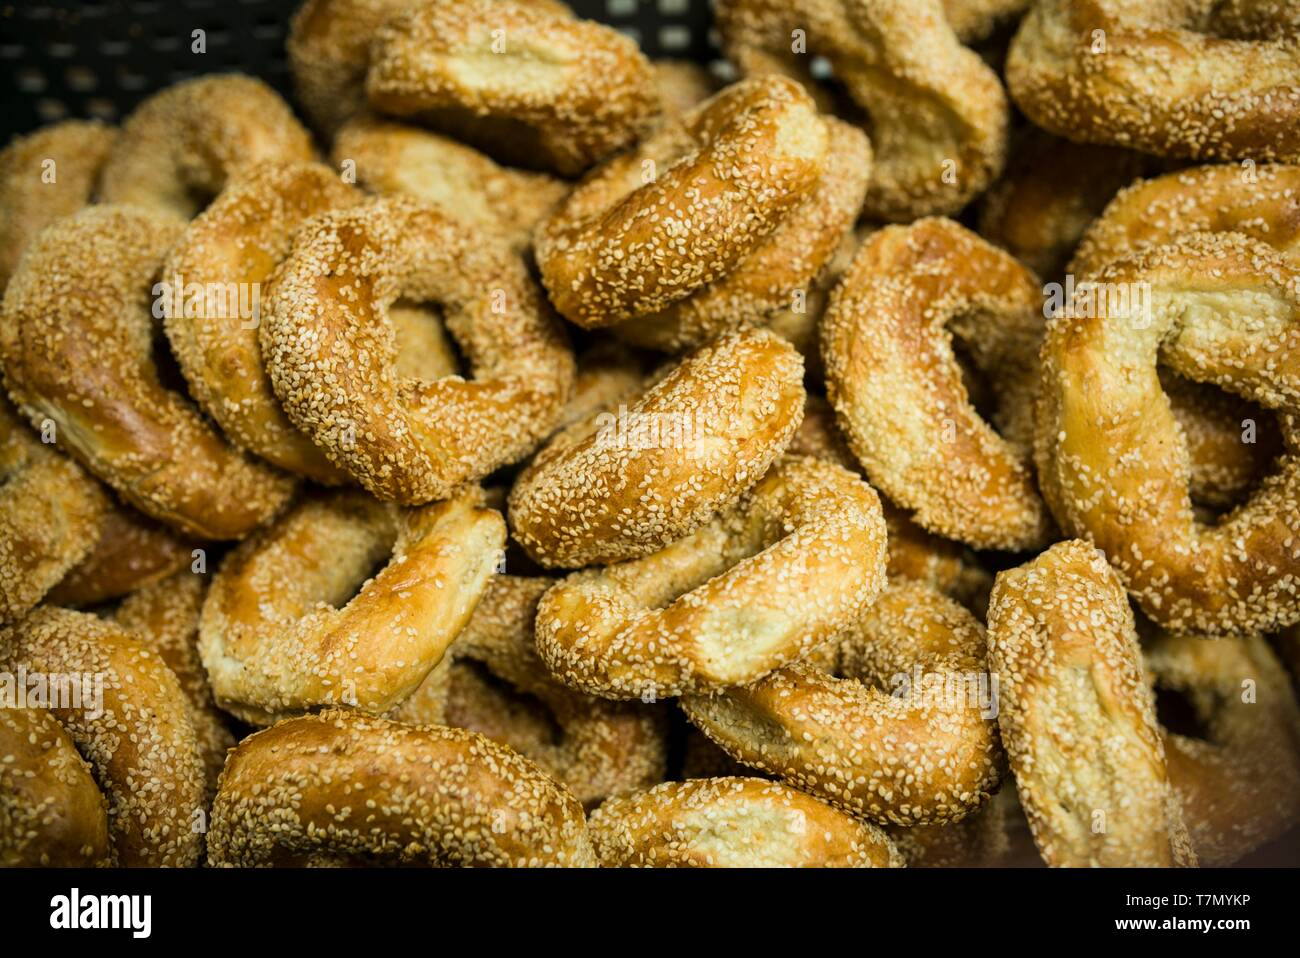 Canada, Quebec, Montreal, Montreal-style bagels Stock Photo